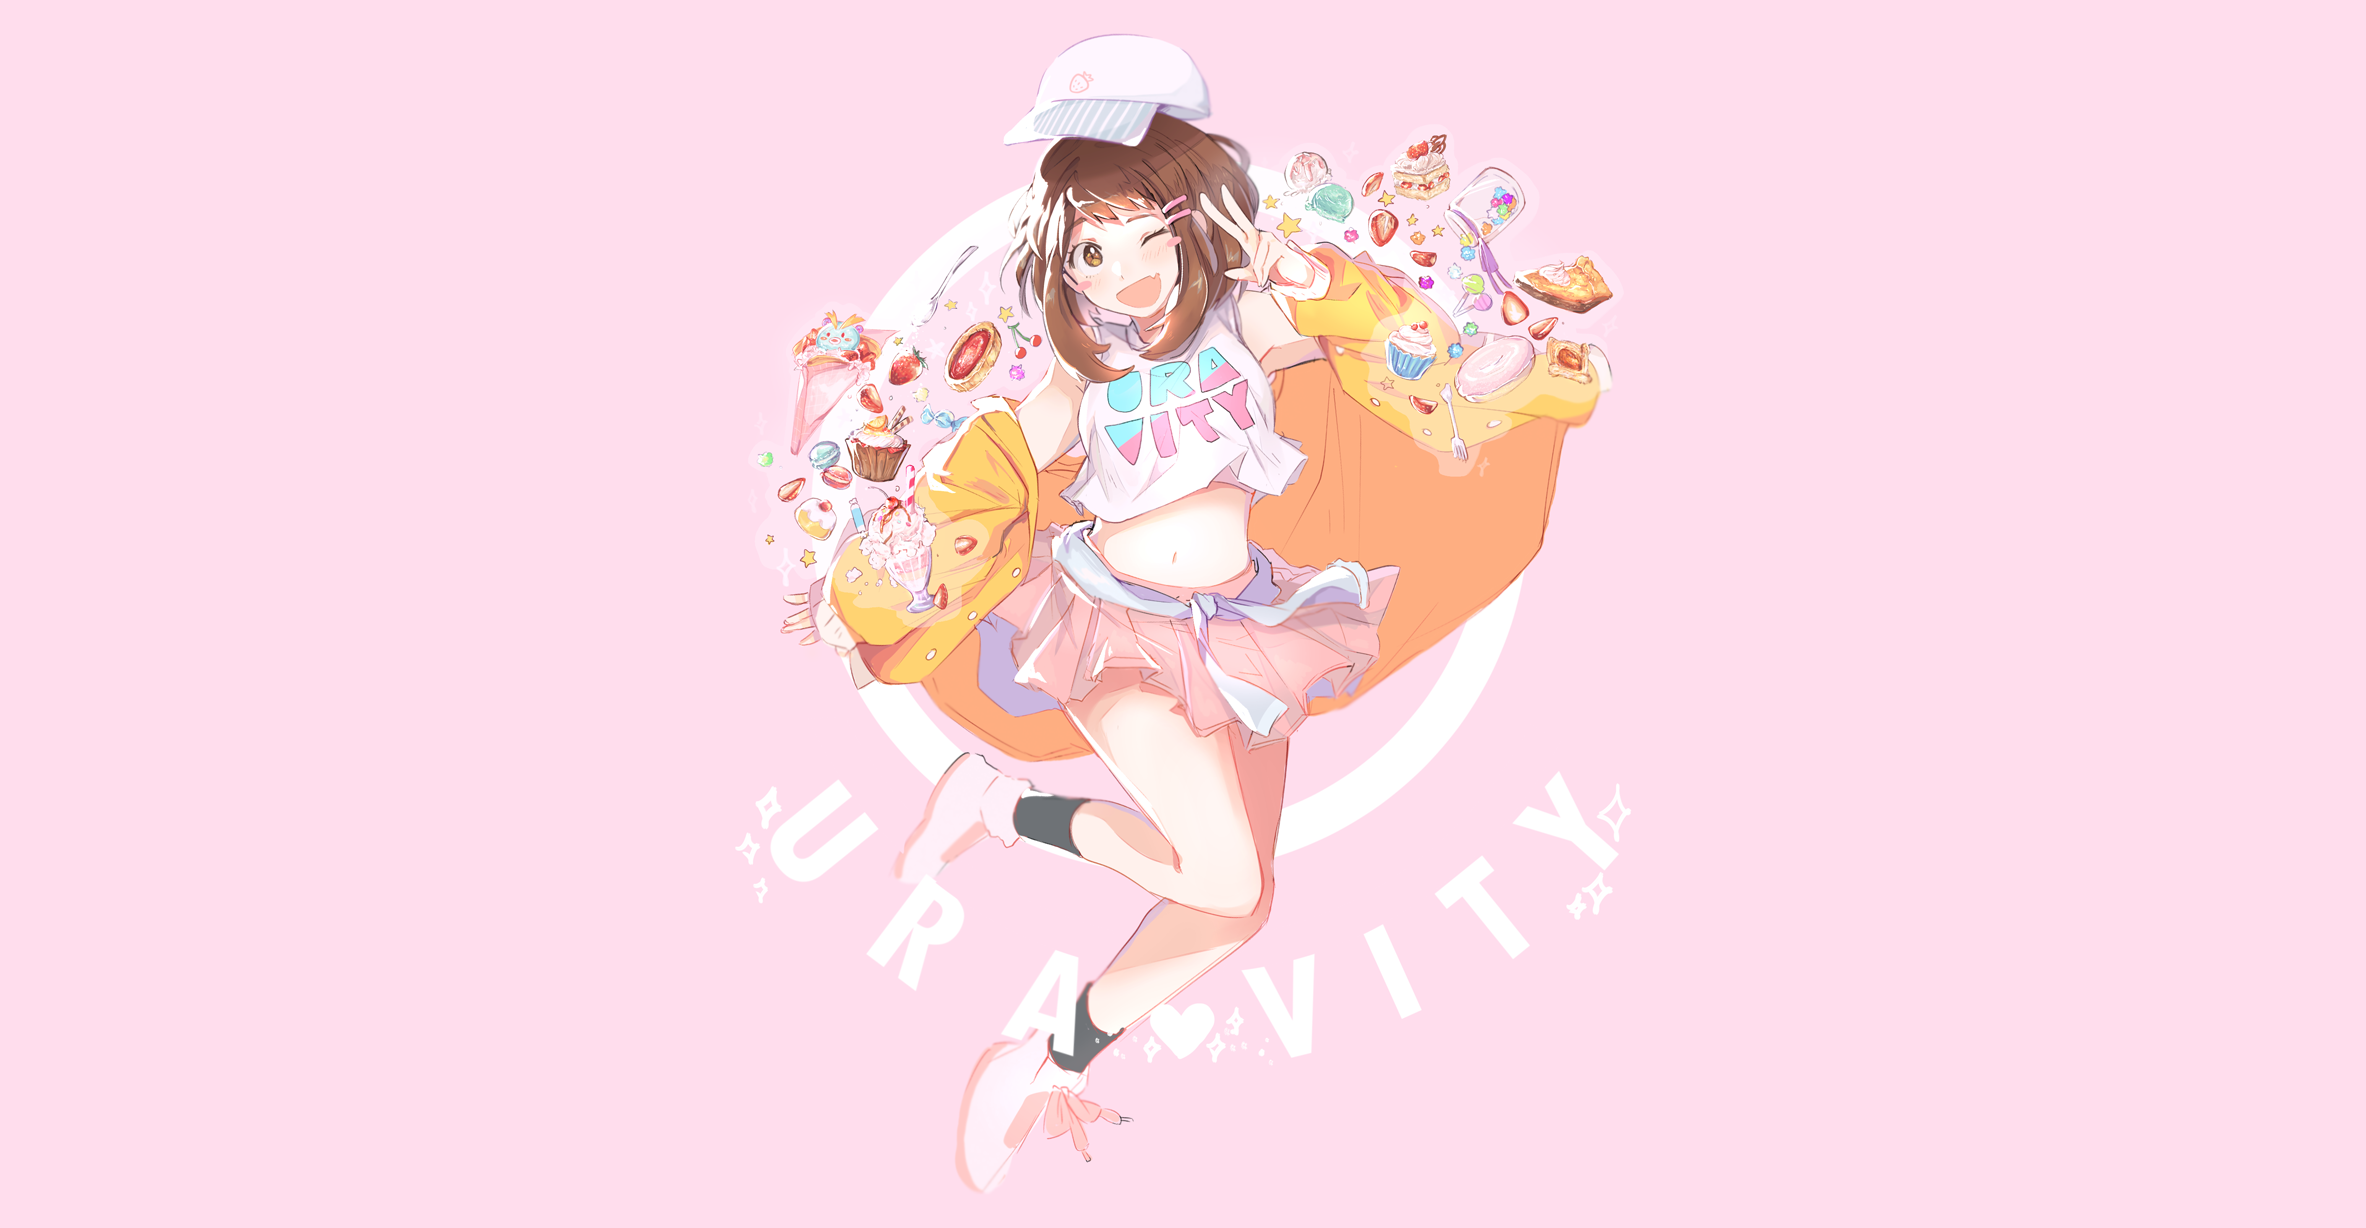 Uravity by Homilily